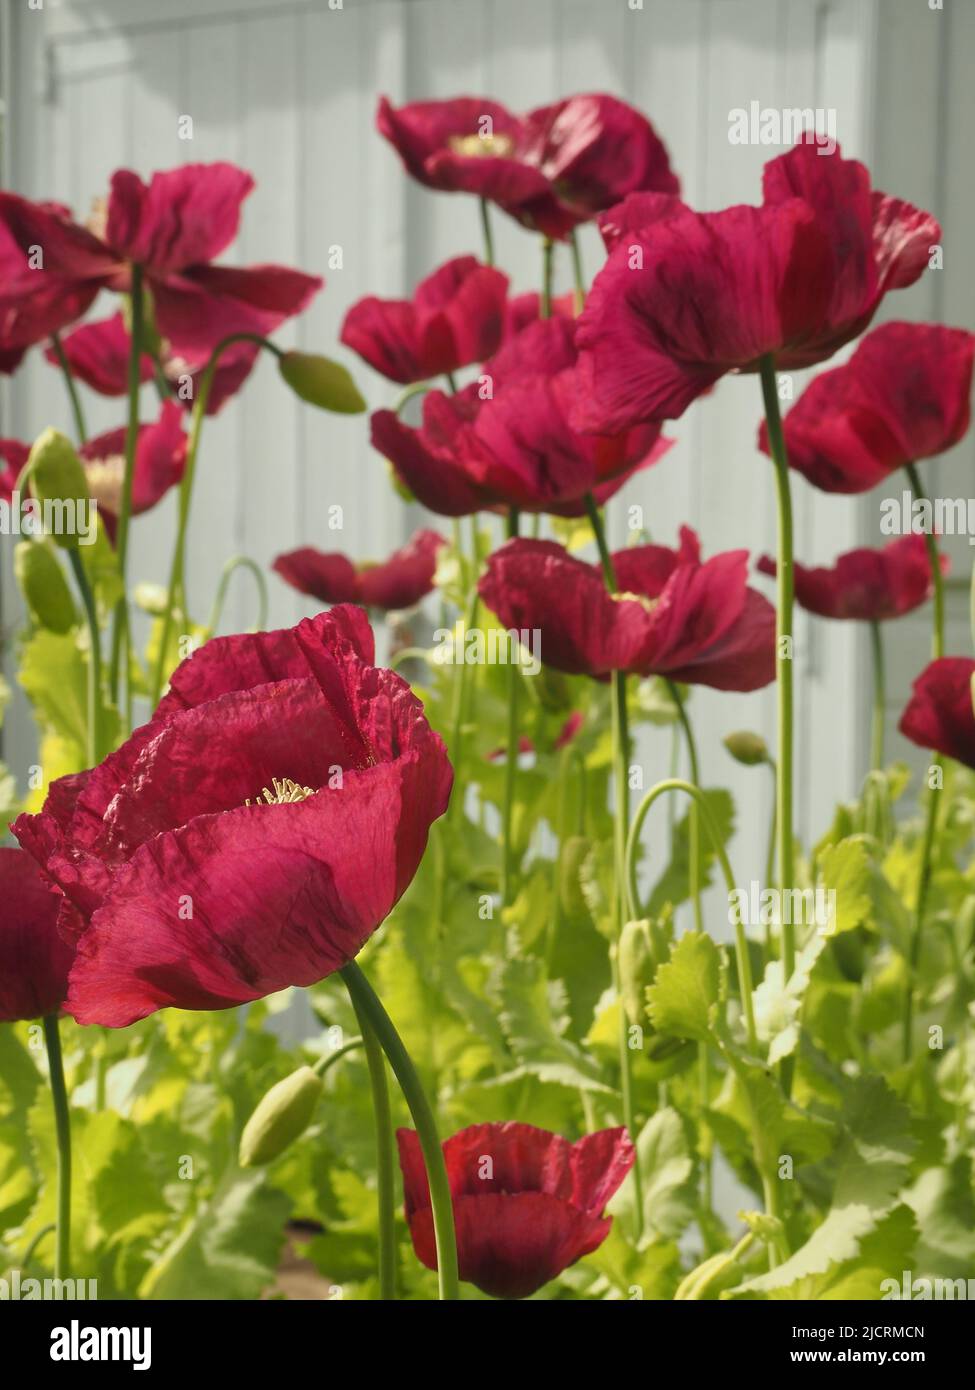 Plum, scarlet or purple coloured Oriental poppies (papaver) which have self seeded in a re-wilded English garden, set against a pale blue backdrop. Stock Photo